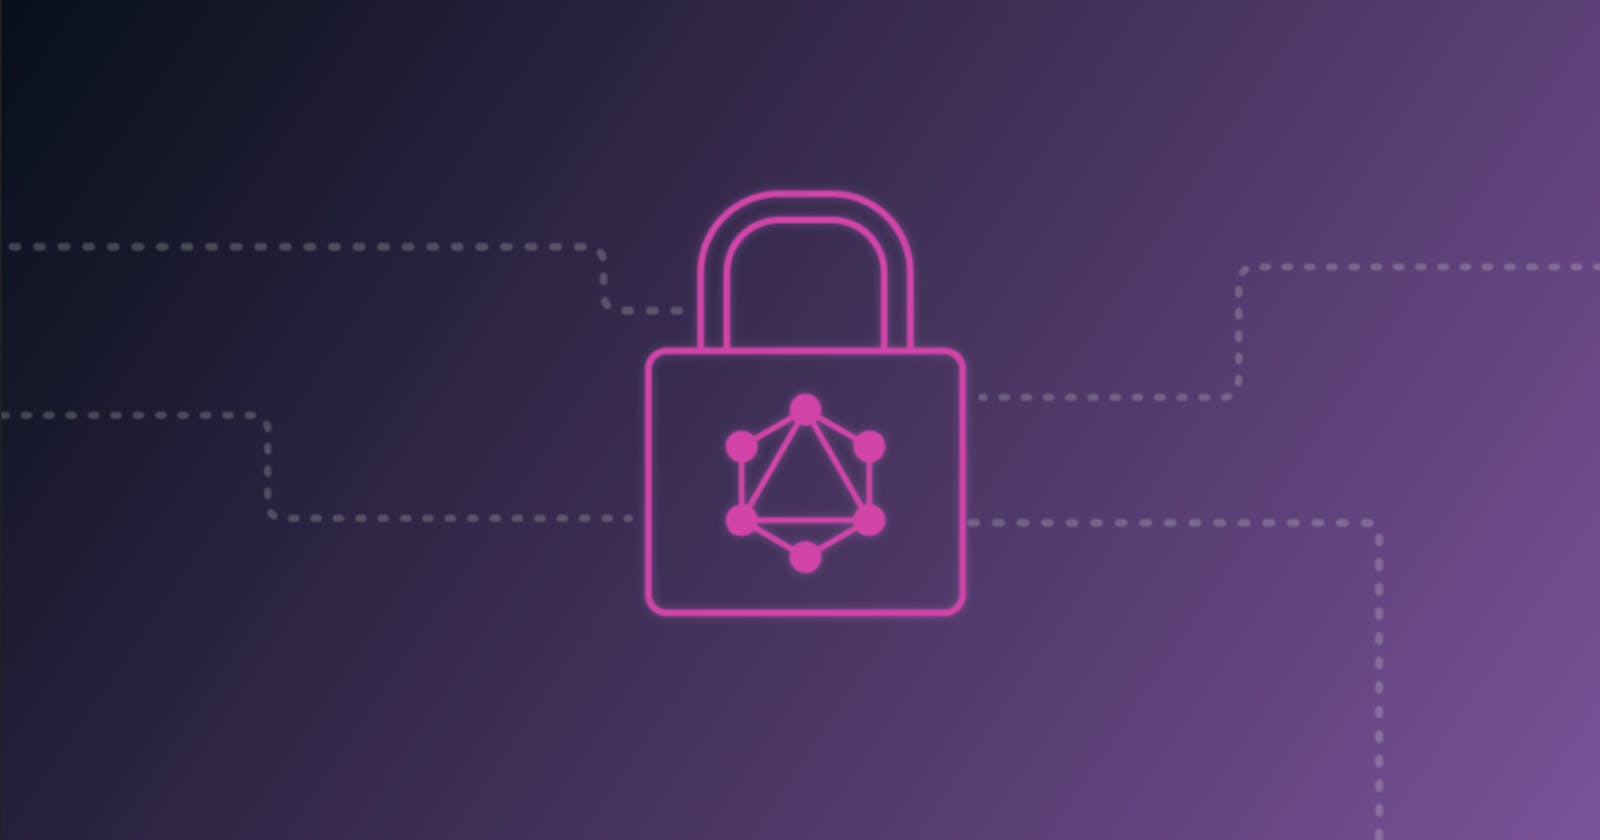 GraphQL Forbidden Bypass Leads to Account Takeover